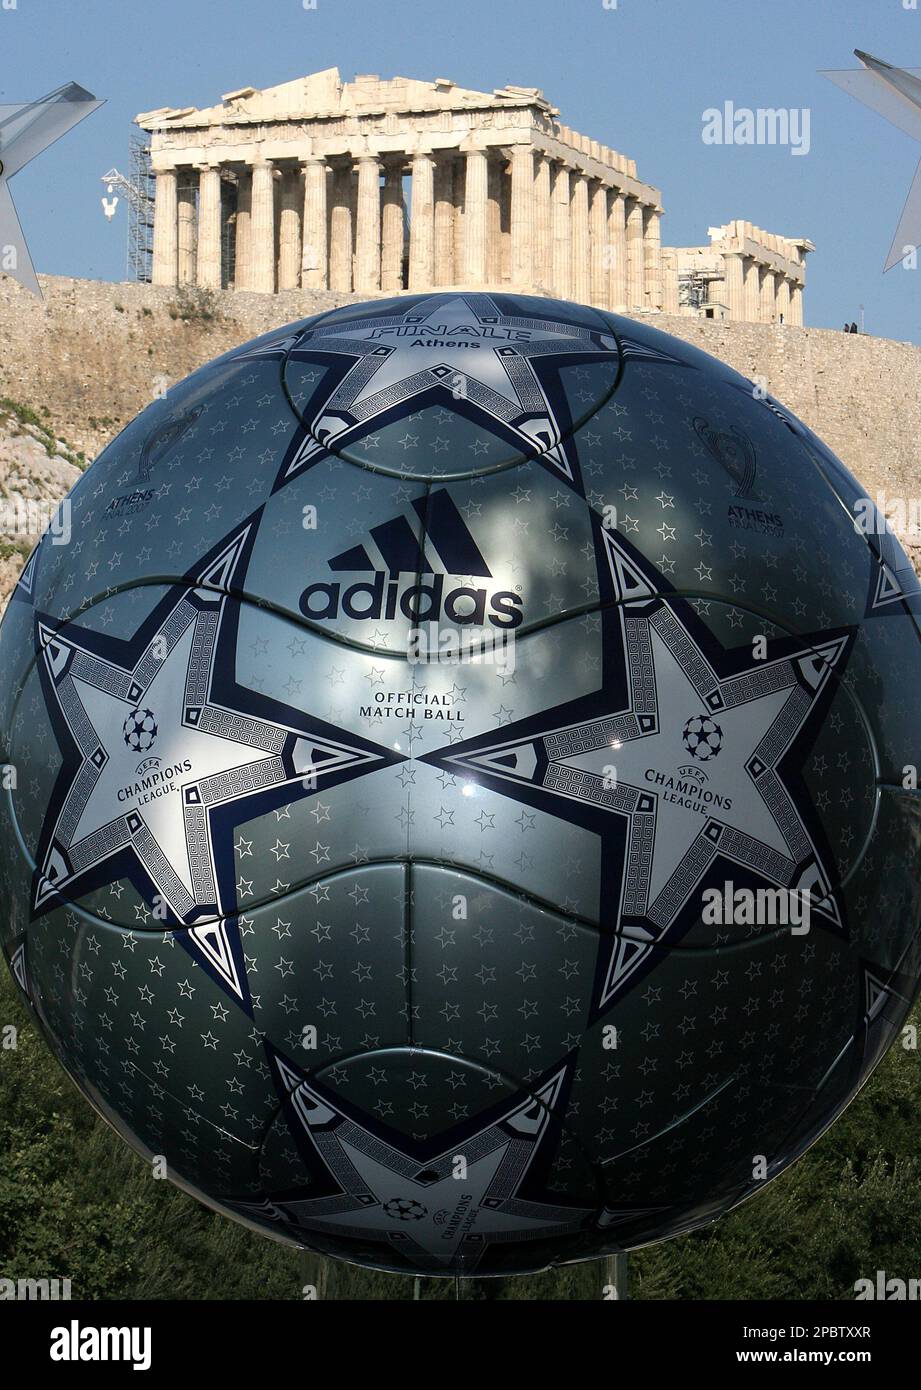 Istanbul 2023 Champions League ball unveiled - AS USA